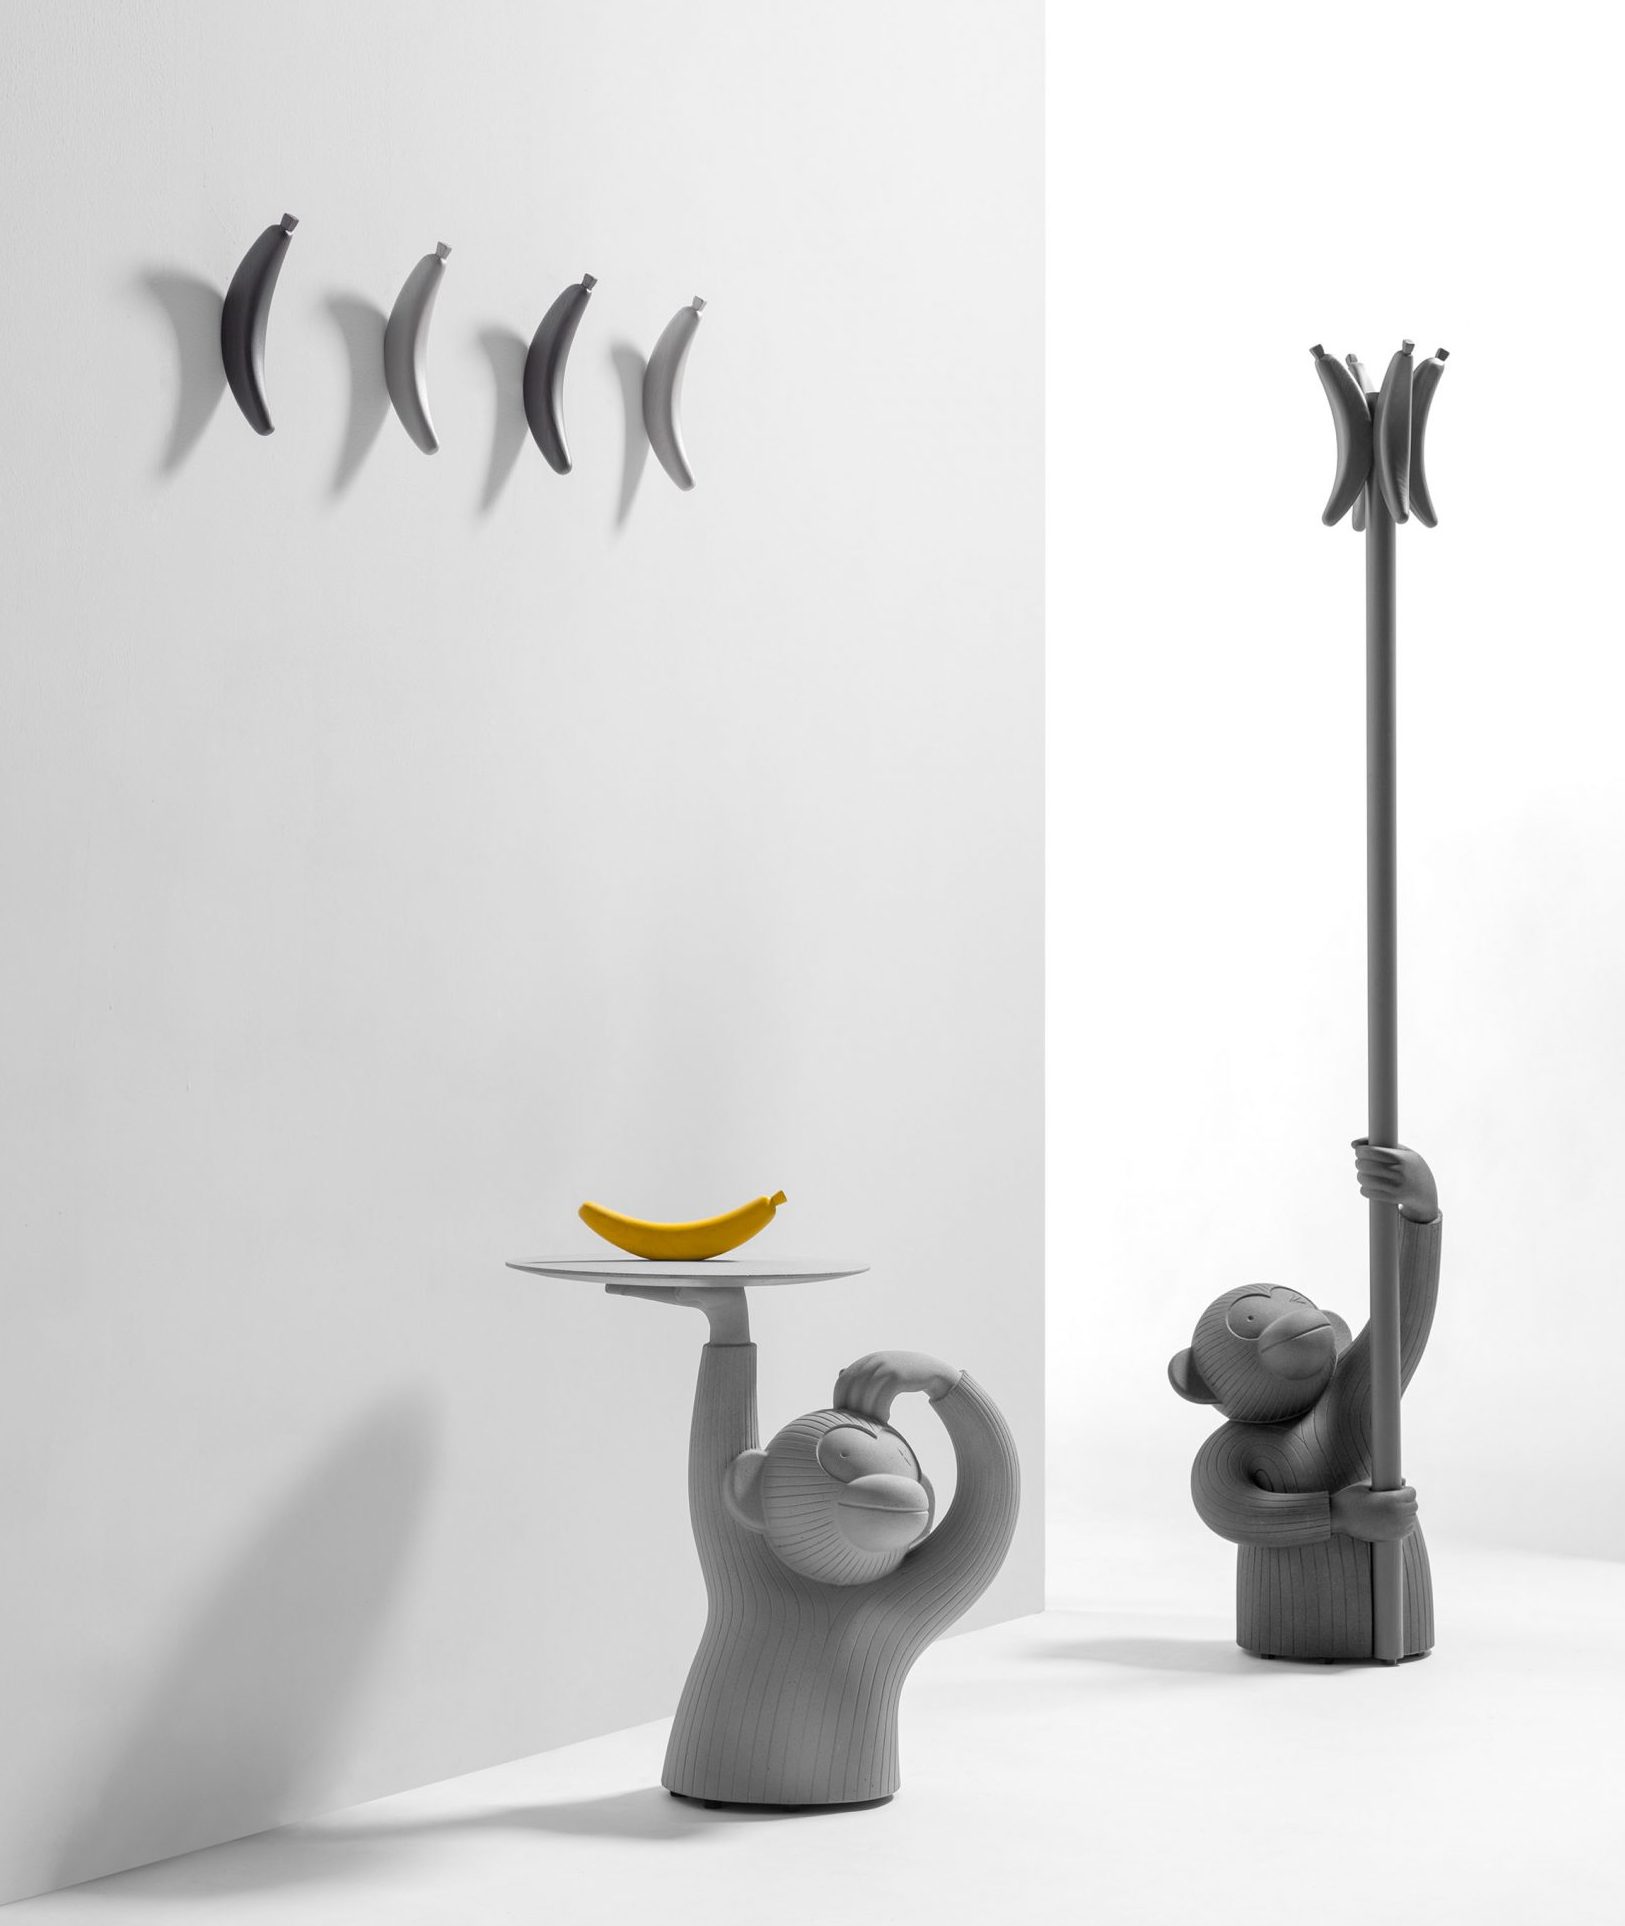 Monkey coat stand by Jaime Hayon for BD Barcelona